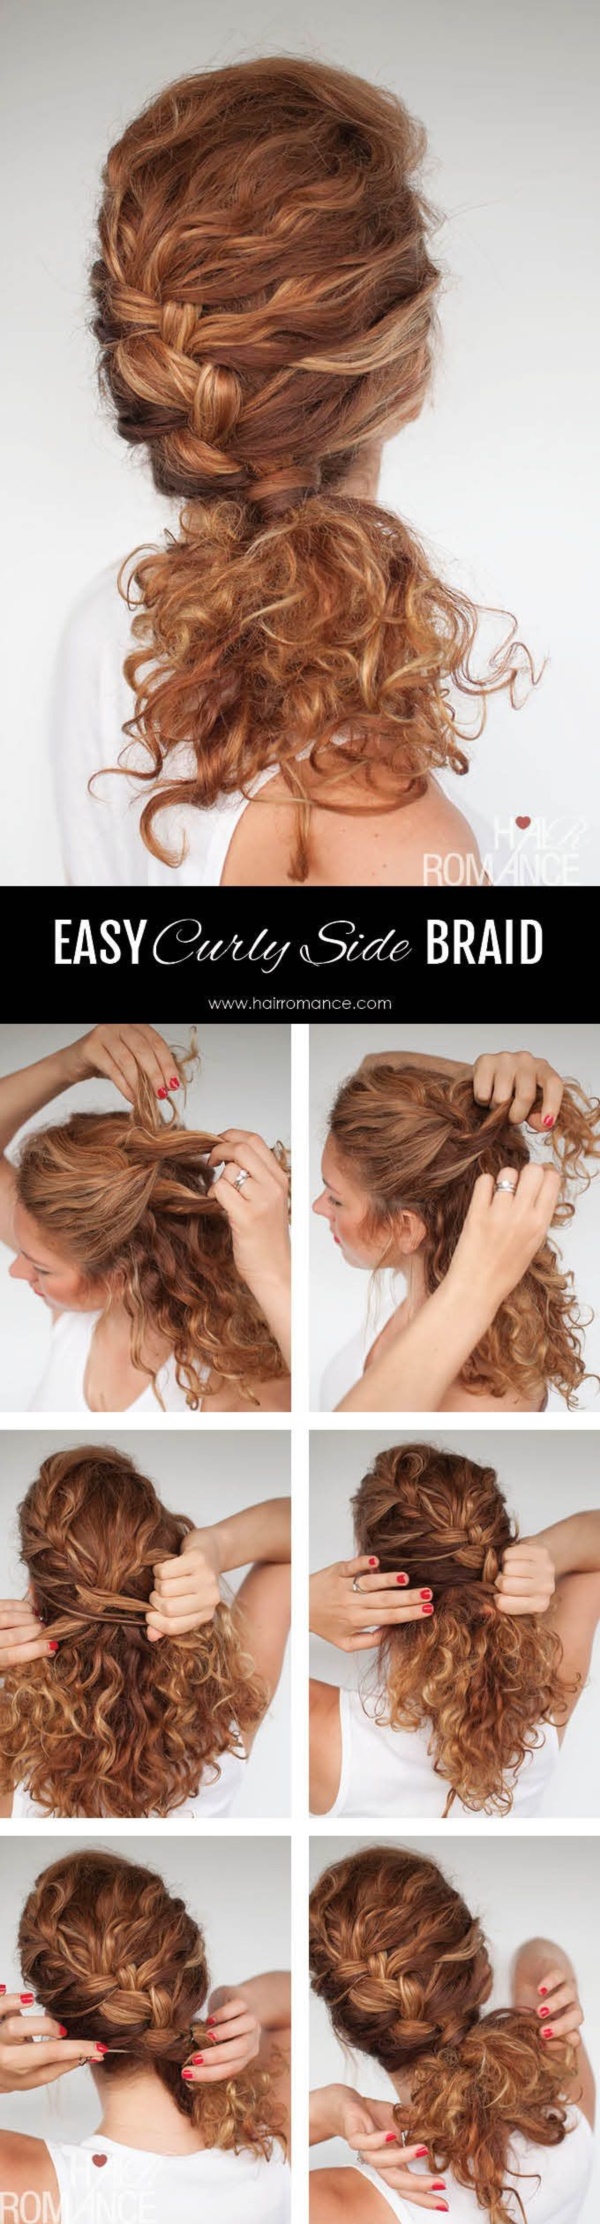 3 Minute Hairstyles for Business Women